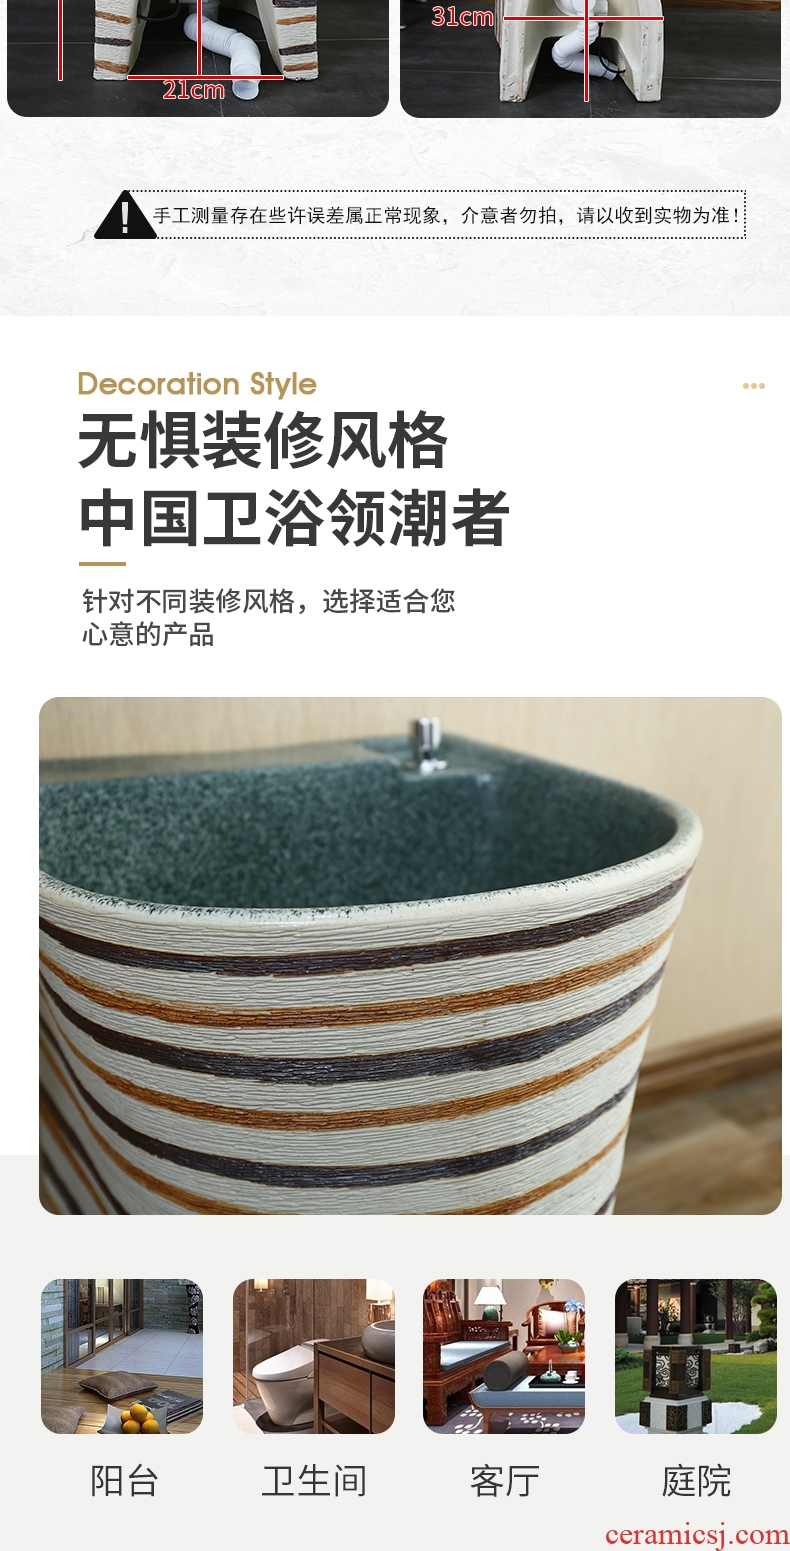 Vintage wash mop pool household balcony one - piece is suing toilet ceramic mop pool courtyard mop basin large size